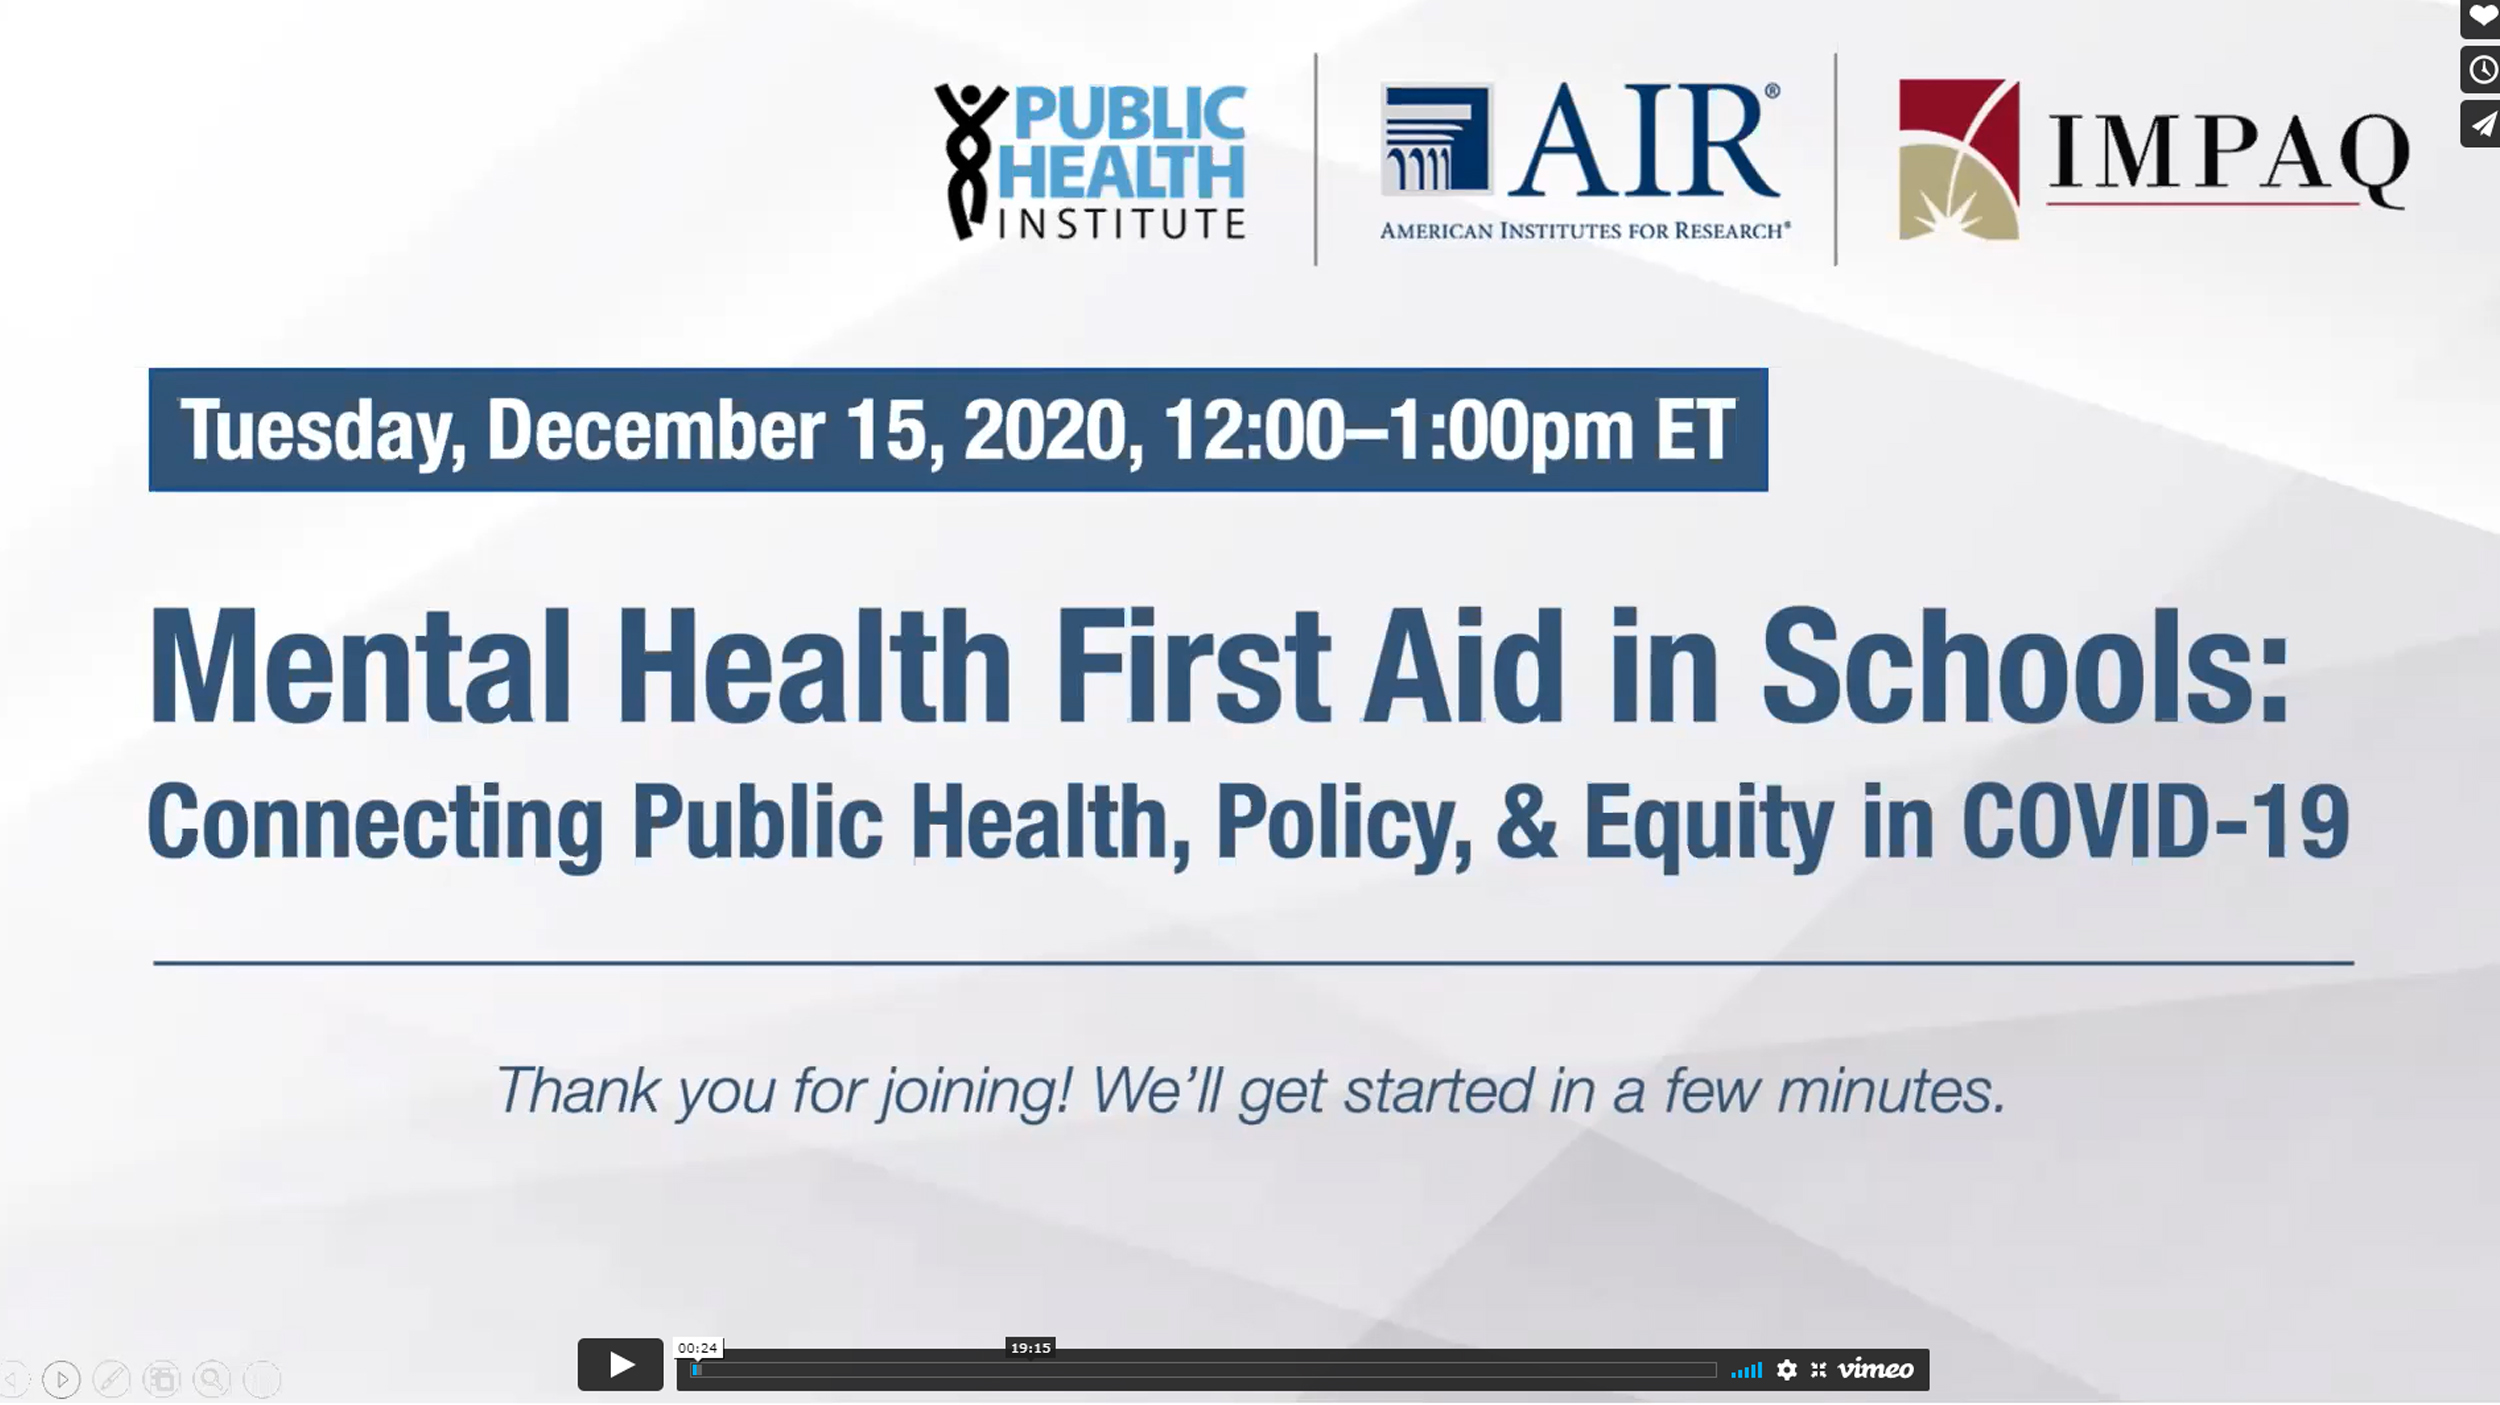 Mental Health First Aid in Schools: Connecting Public Health, Policy, & Equity in COVID-19